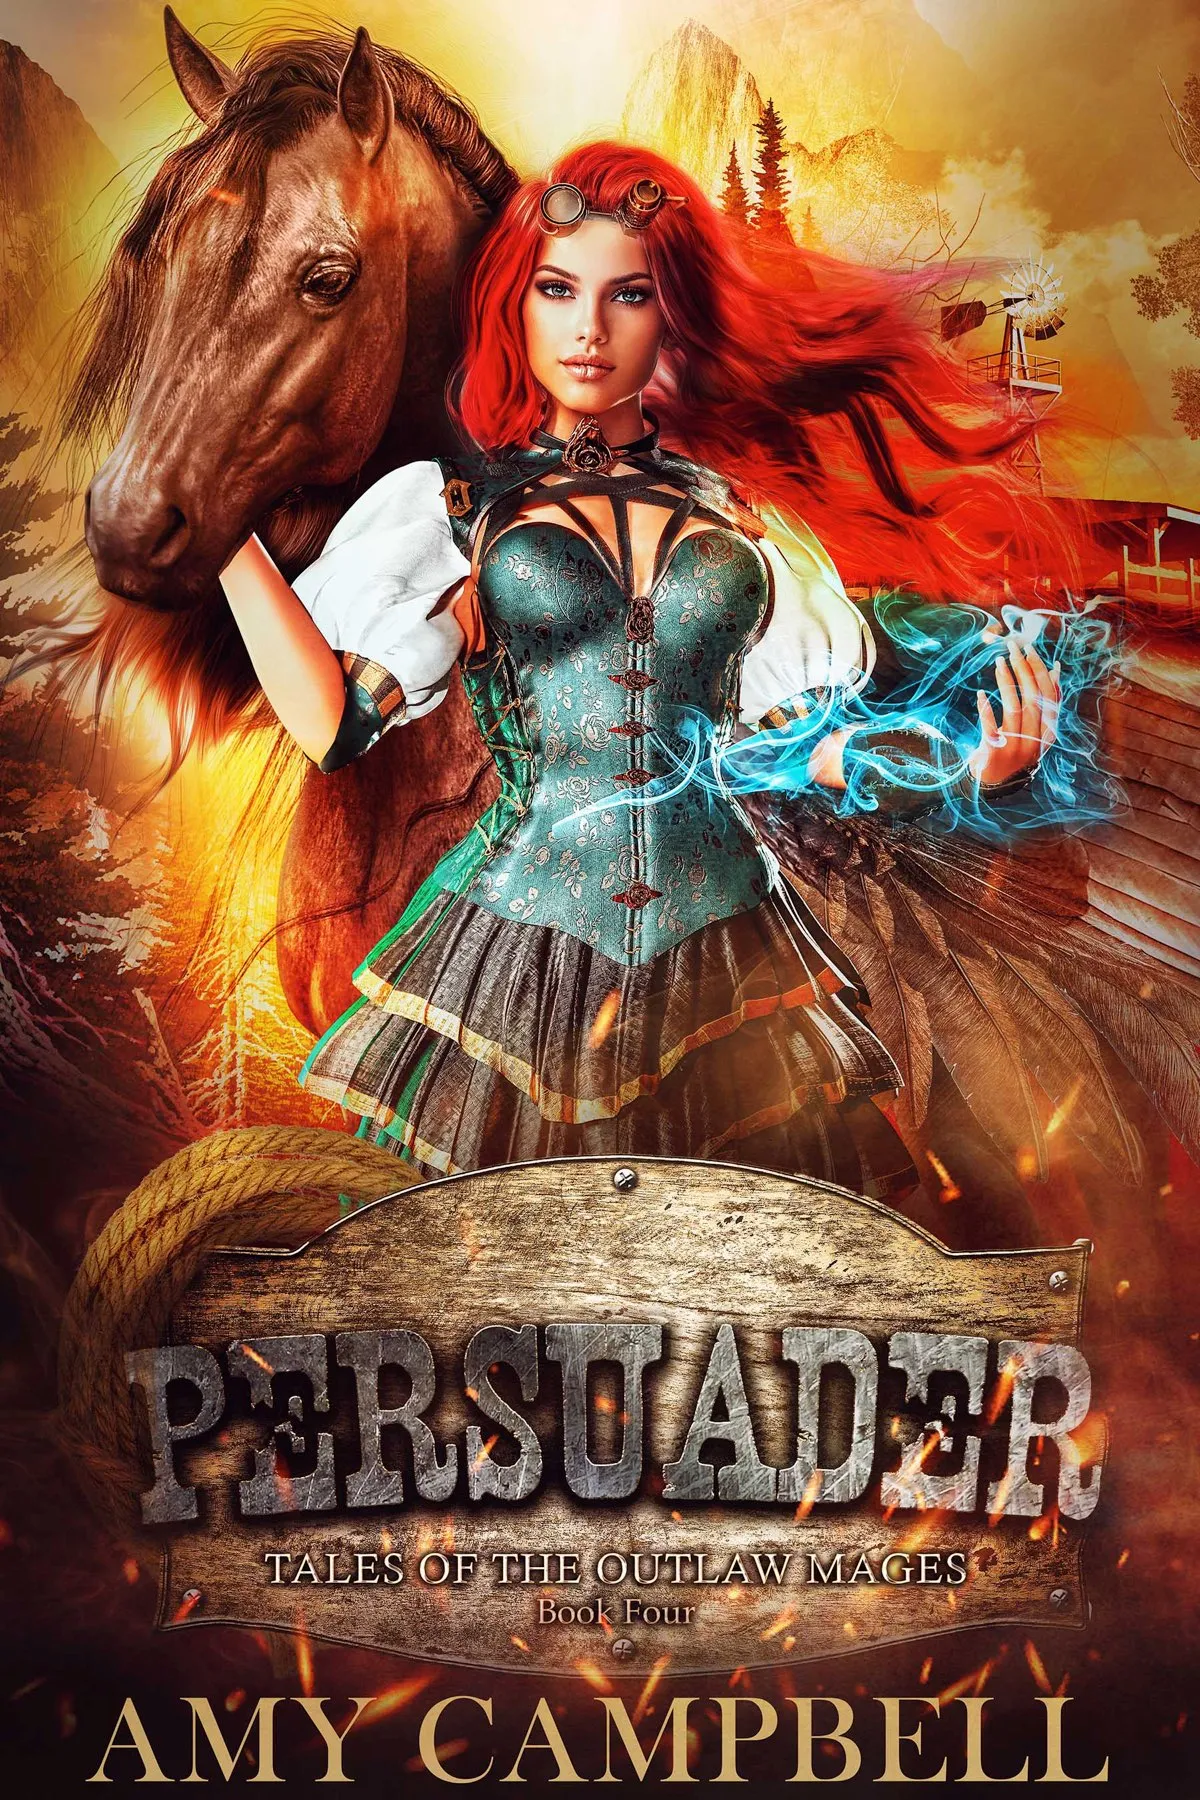 Persuader (Tales of the Outlaw Mages #4)